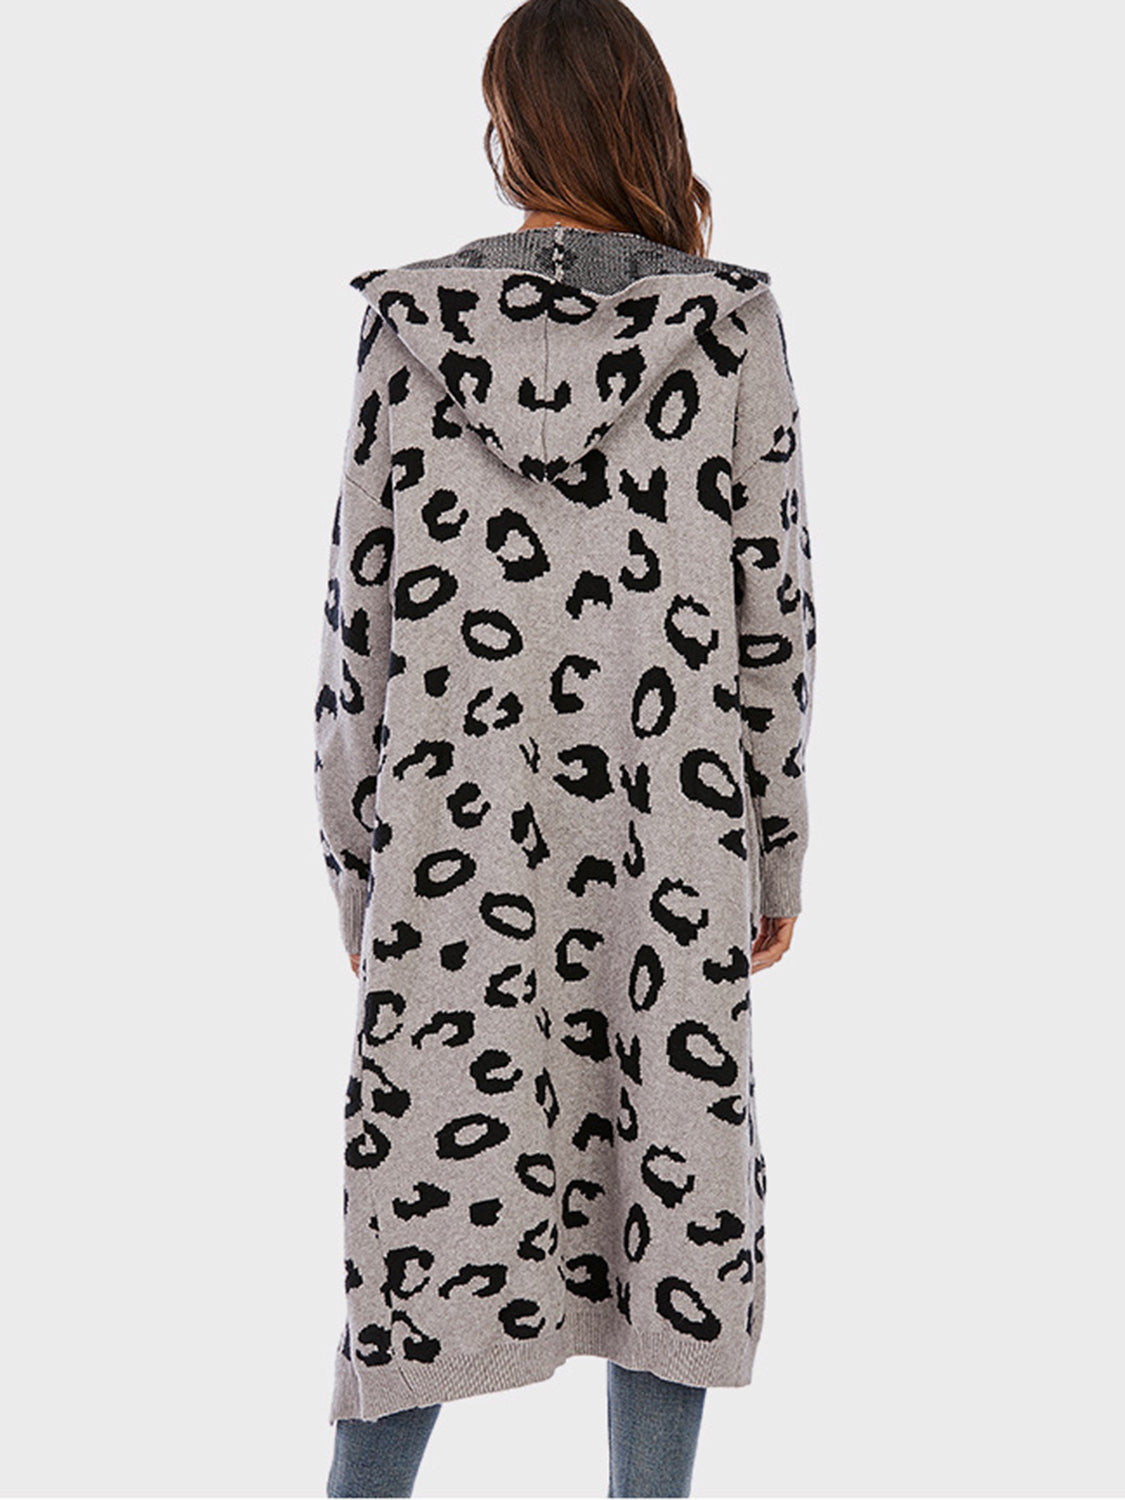 Leopard Hooded Cardigan with Pockets - Women’s Clothing & Accessories - Shirts & Tops - 6 - 2024